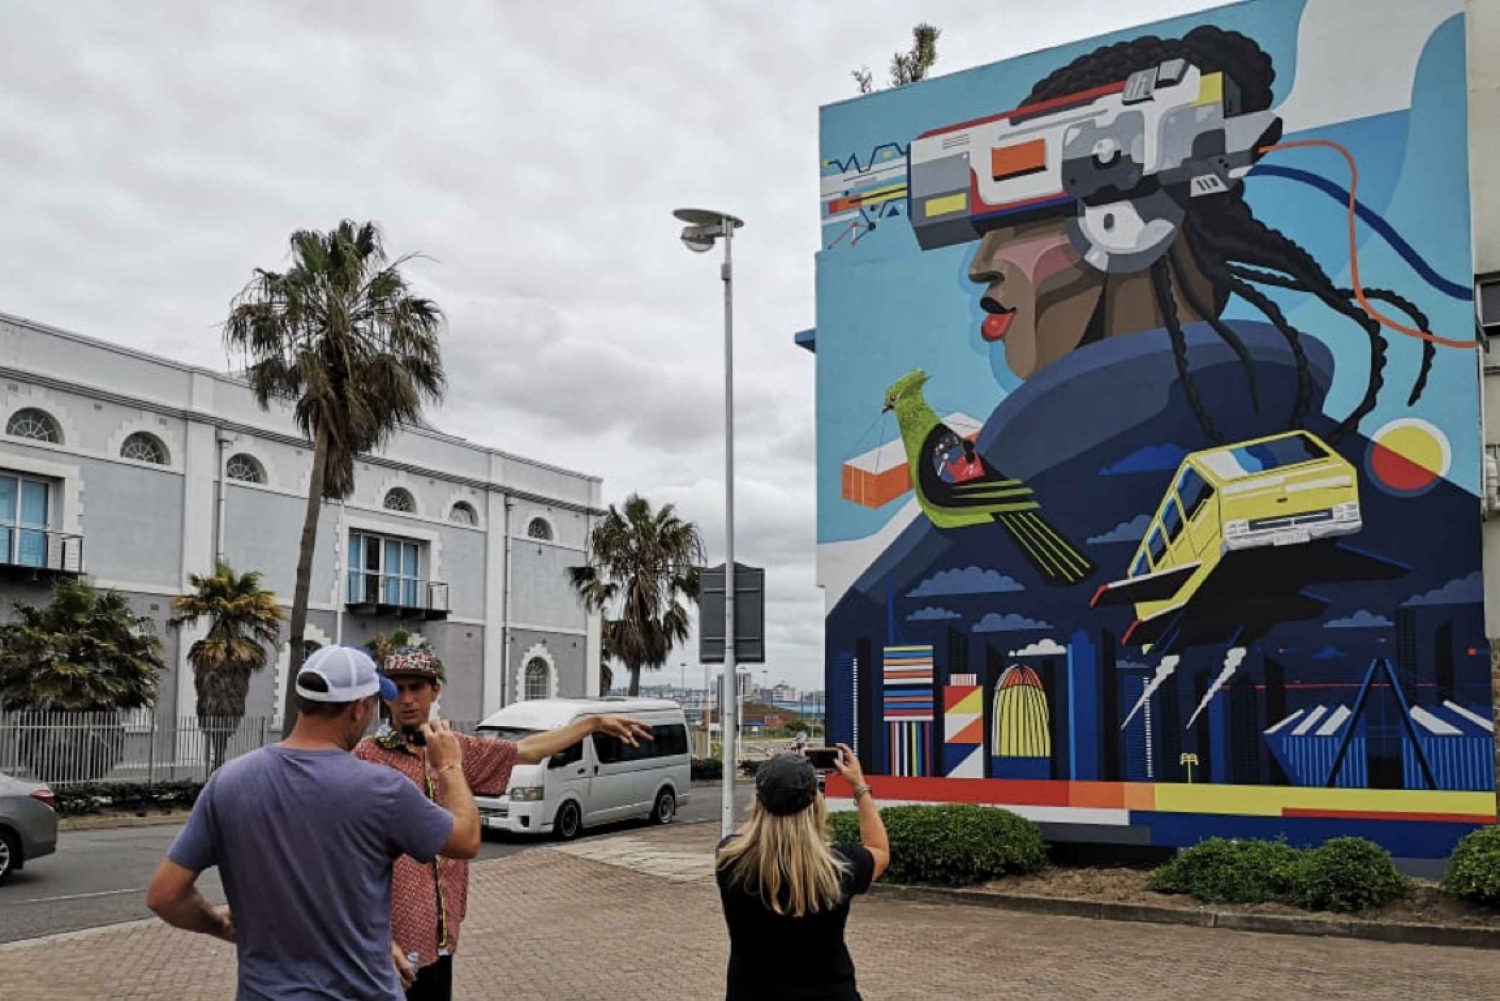 Durban: Arts Quarter Tour with Tribal Museum and Art Gallery